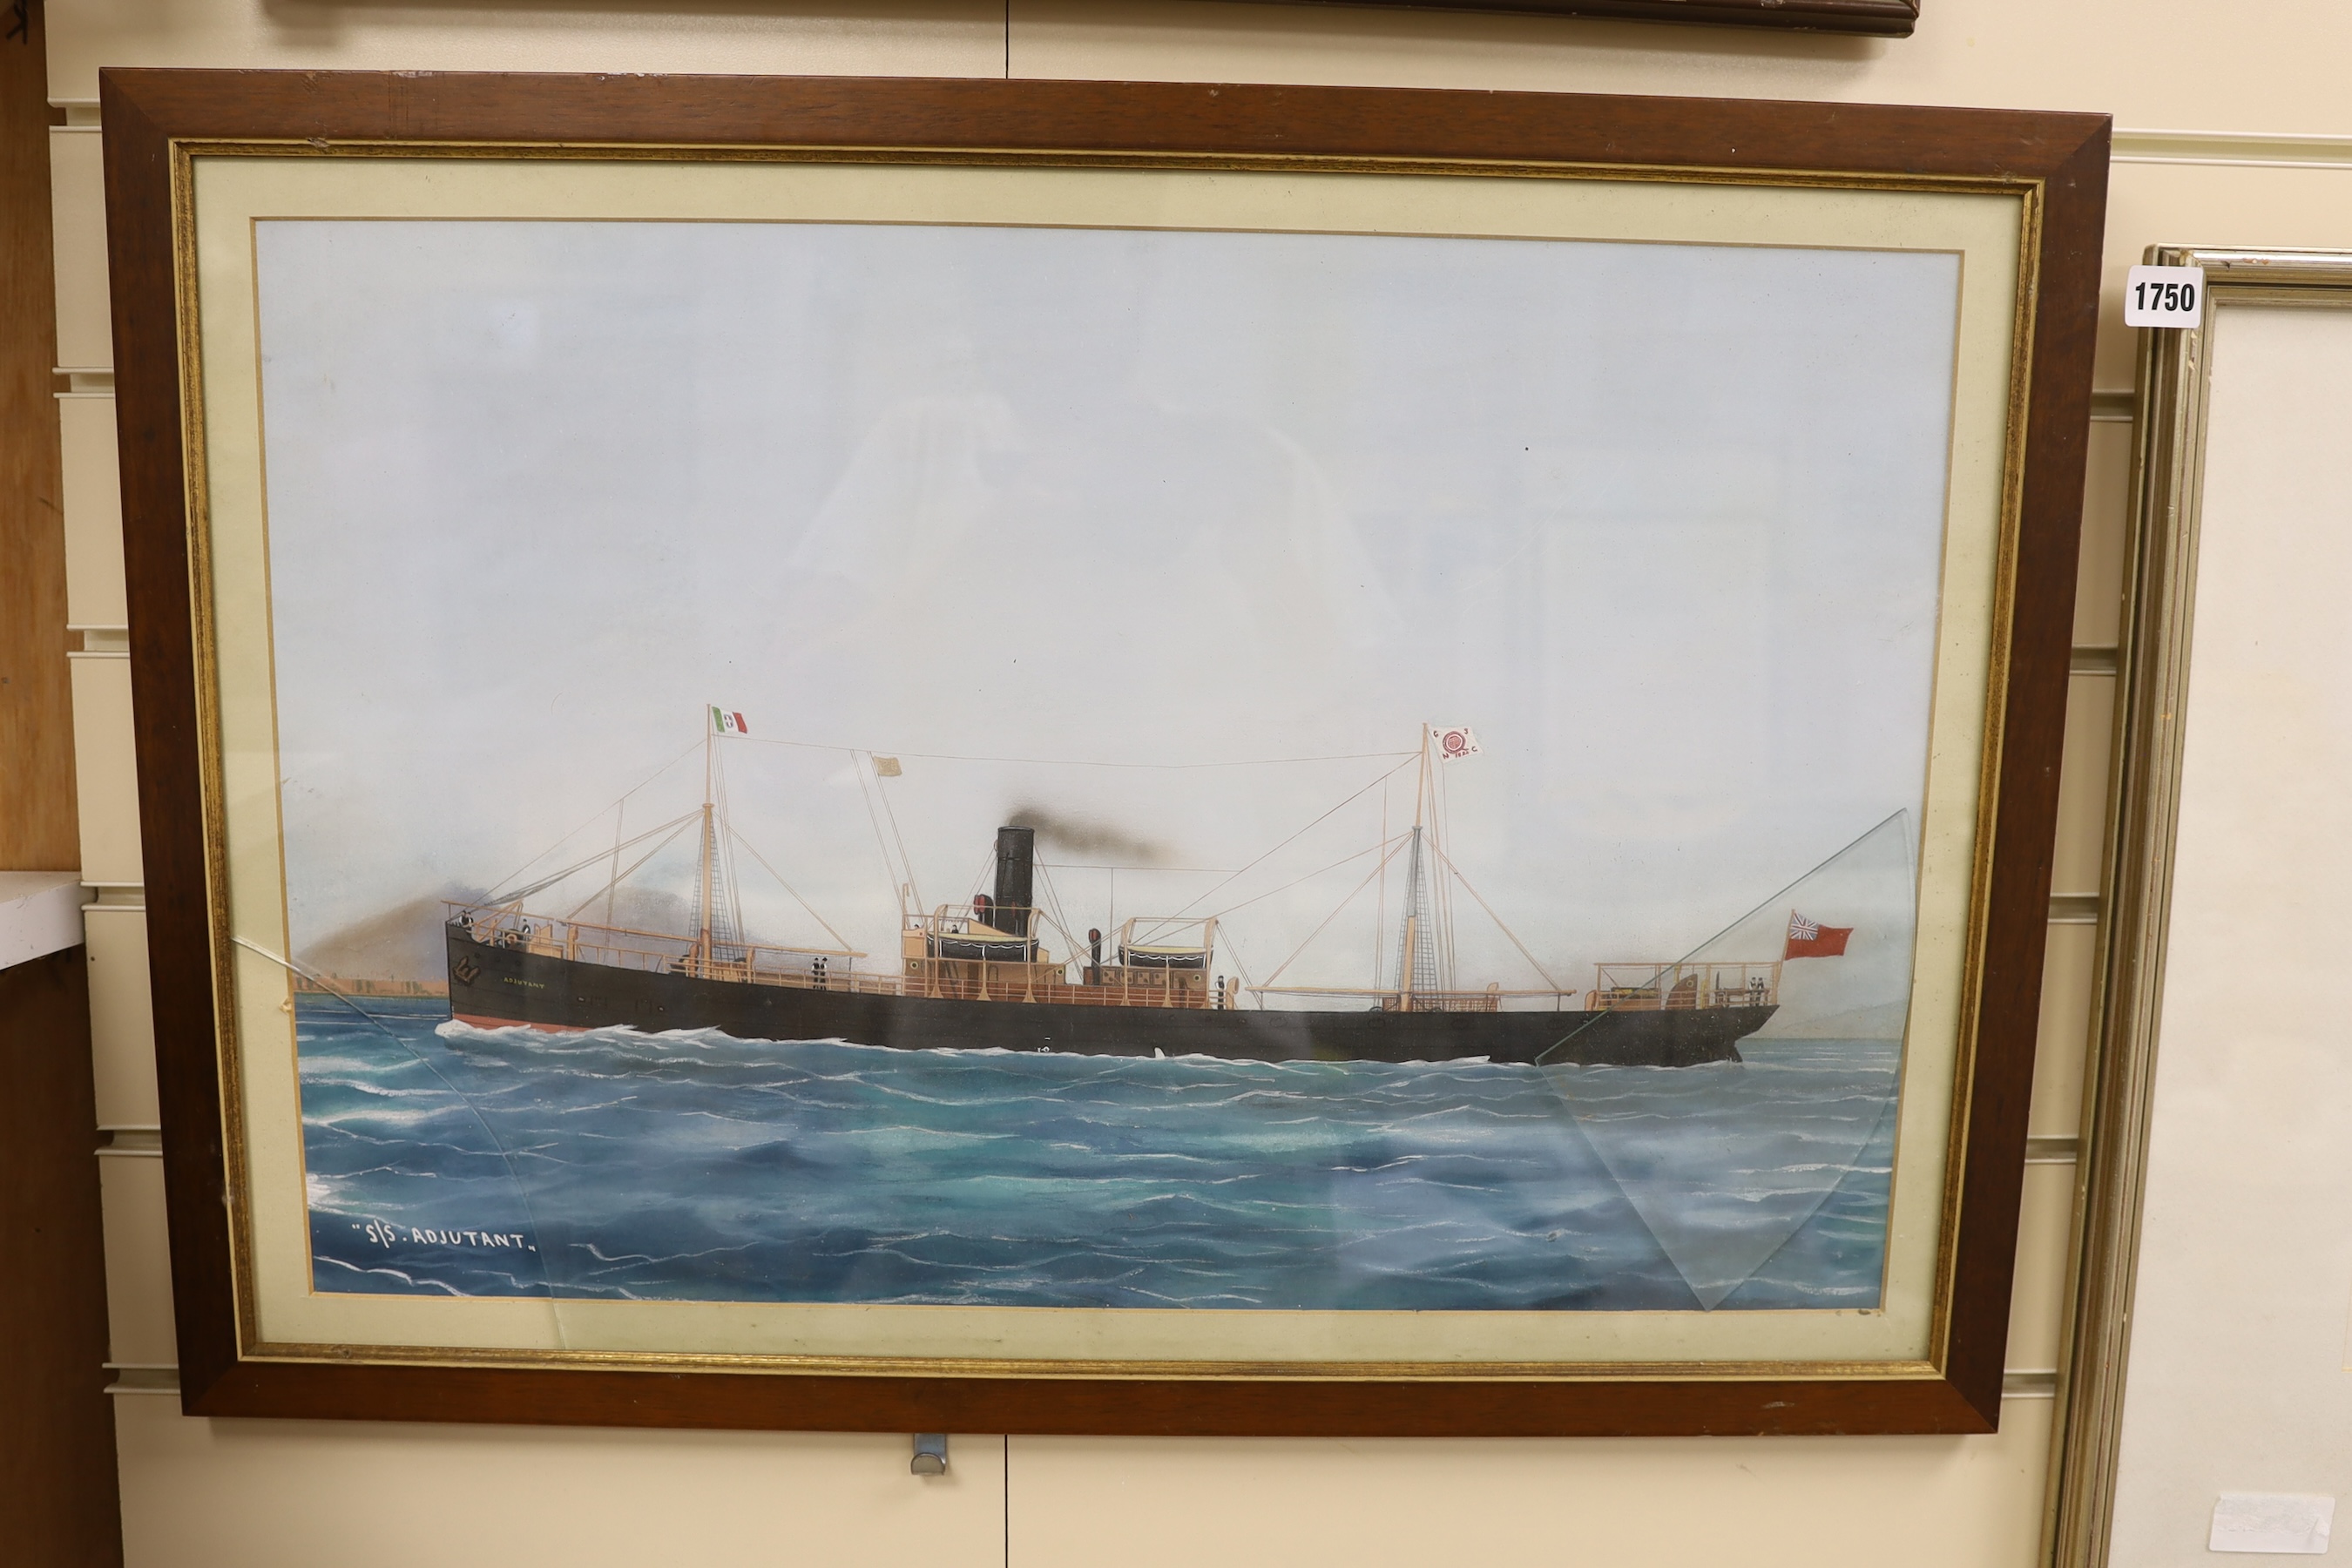 Neapolitan School, c.1900, gouache, The Steamship Adjutant, Great Northern Steamship Co., 41 x 63cm. Condition - poor, discolouration to the paper, glass broken